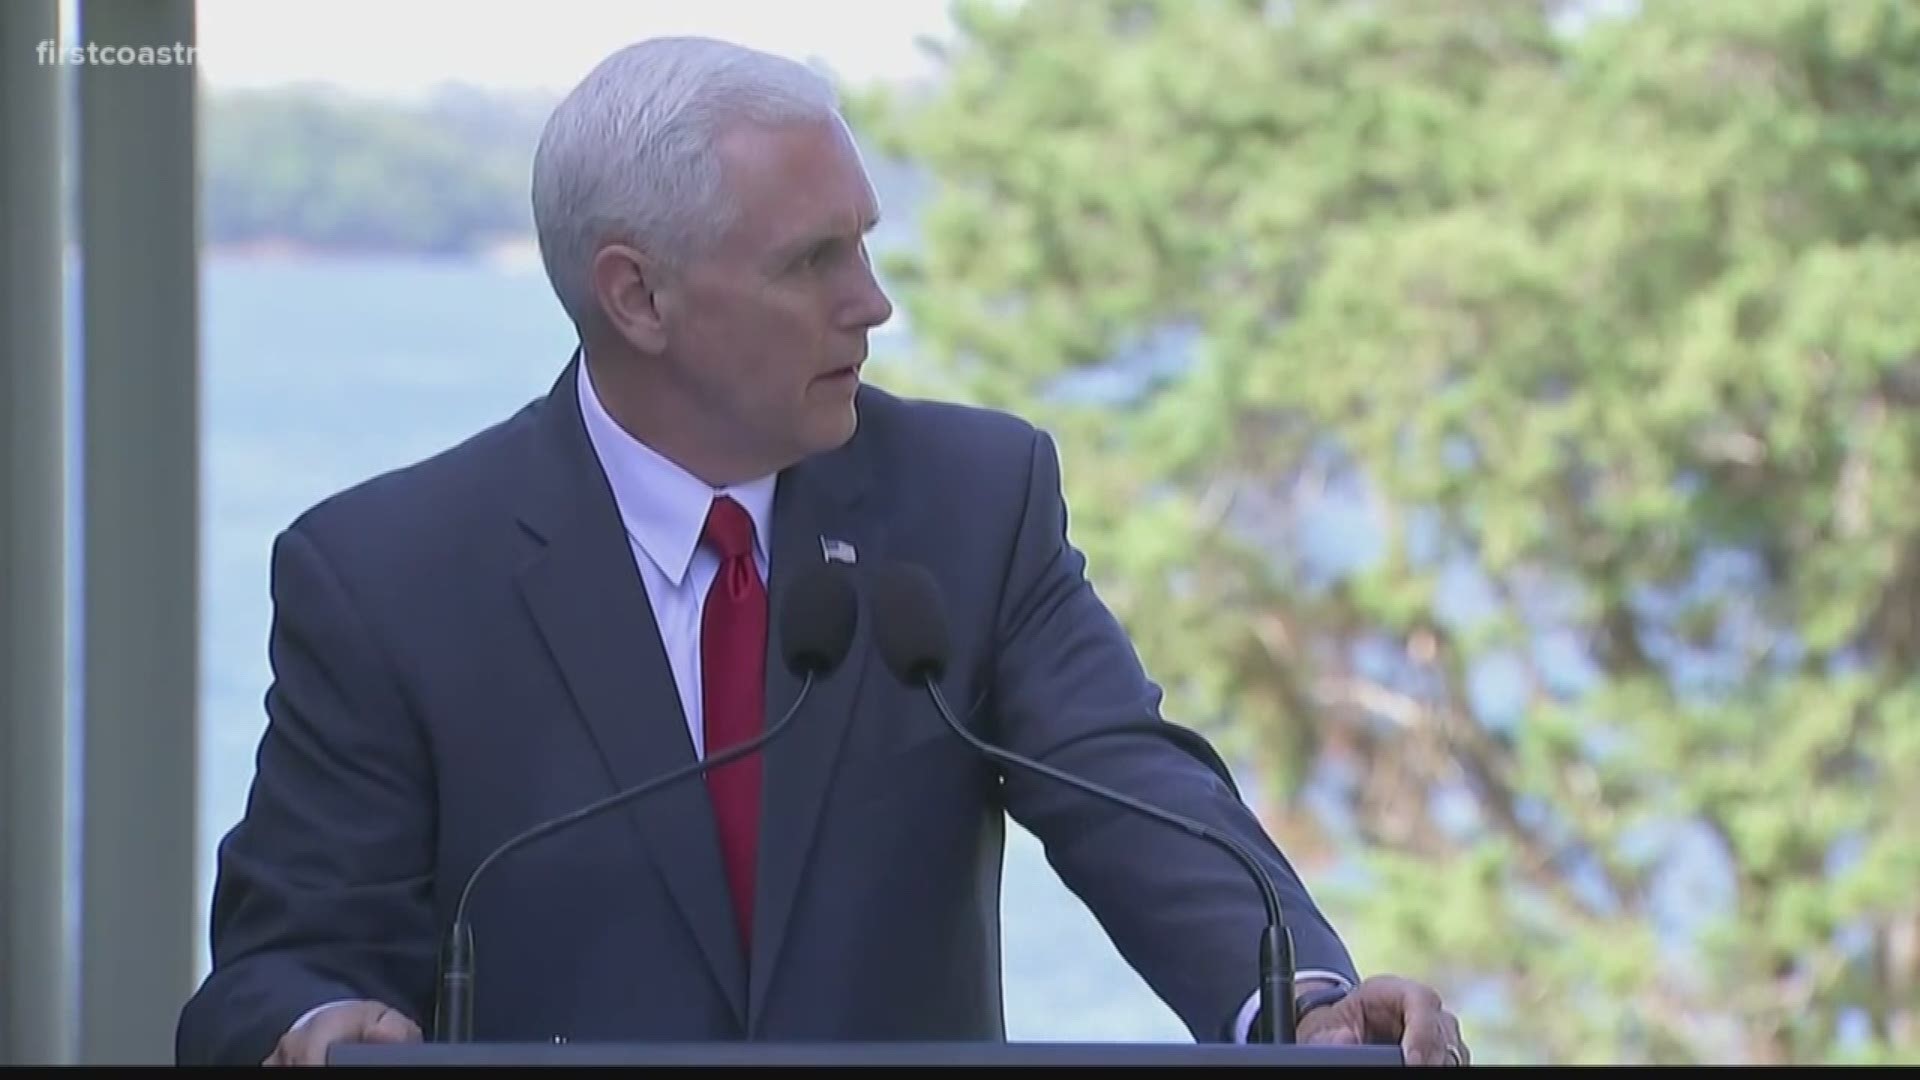 First Coast News will cover the Vice President's visit to Jacksonville.